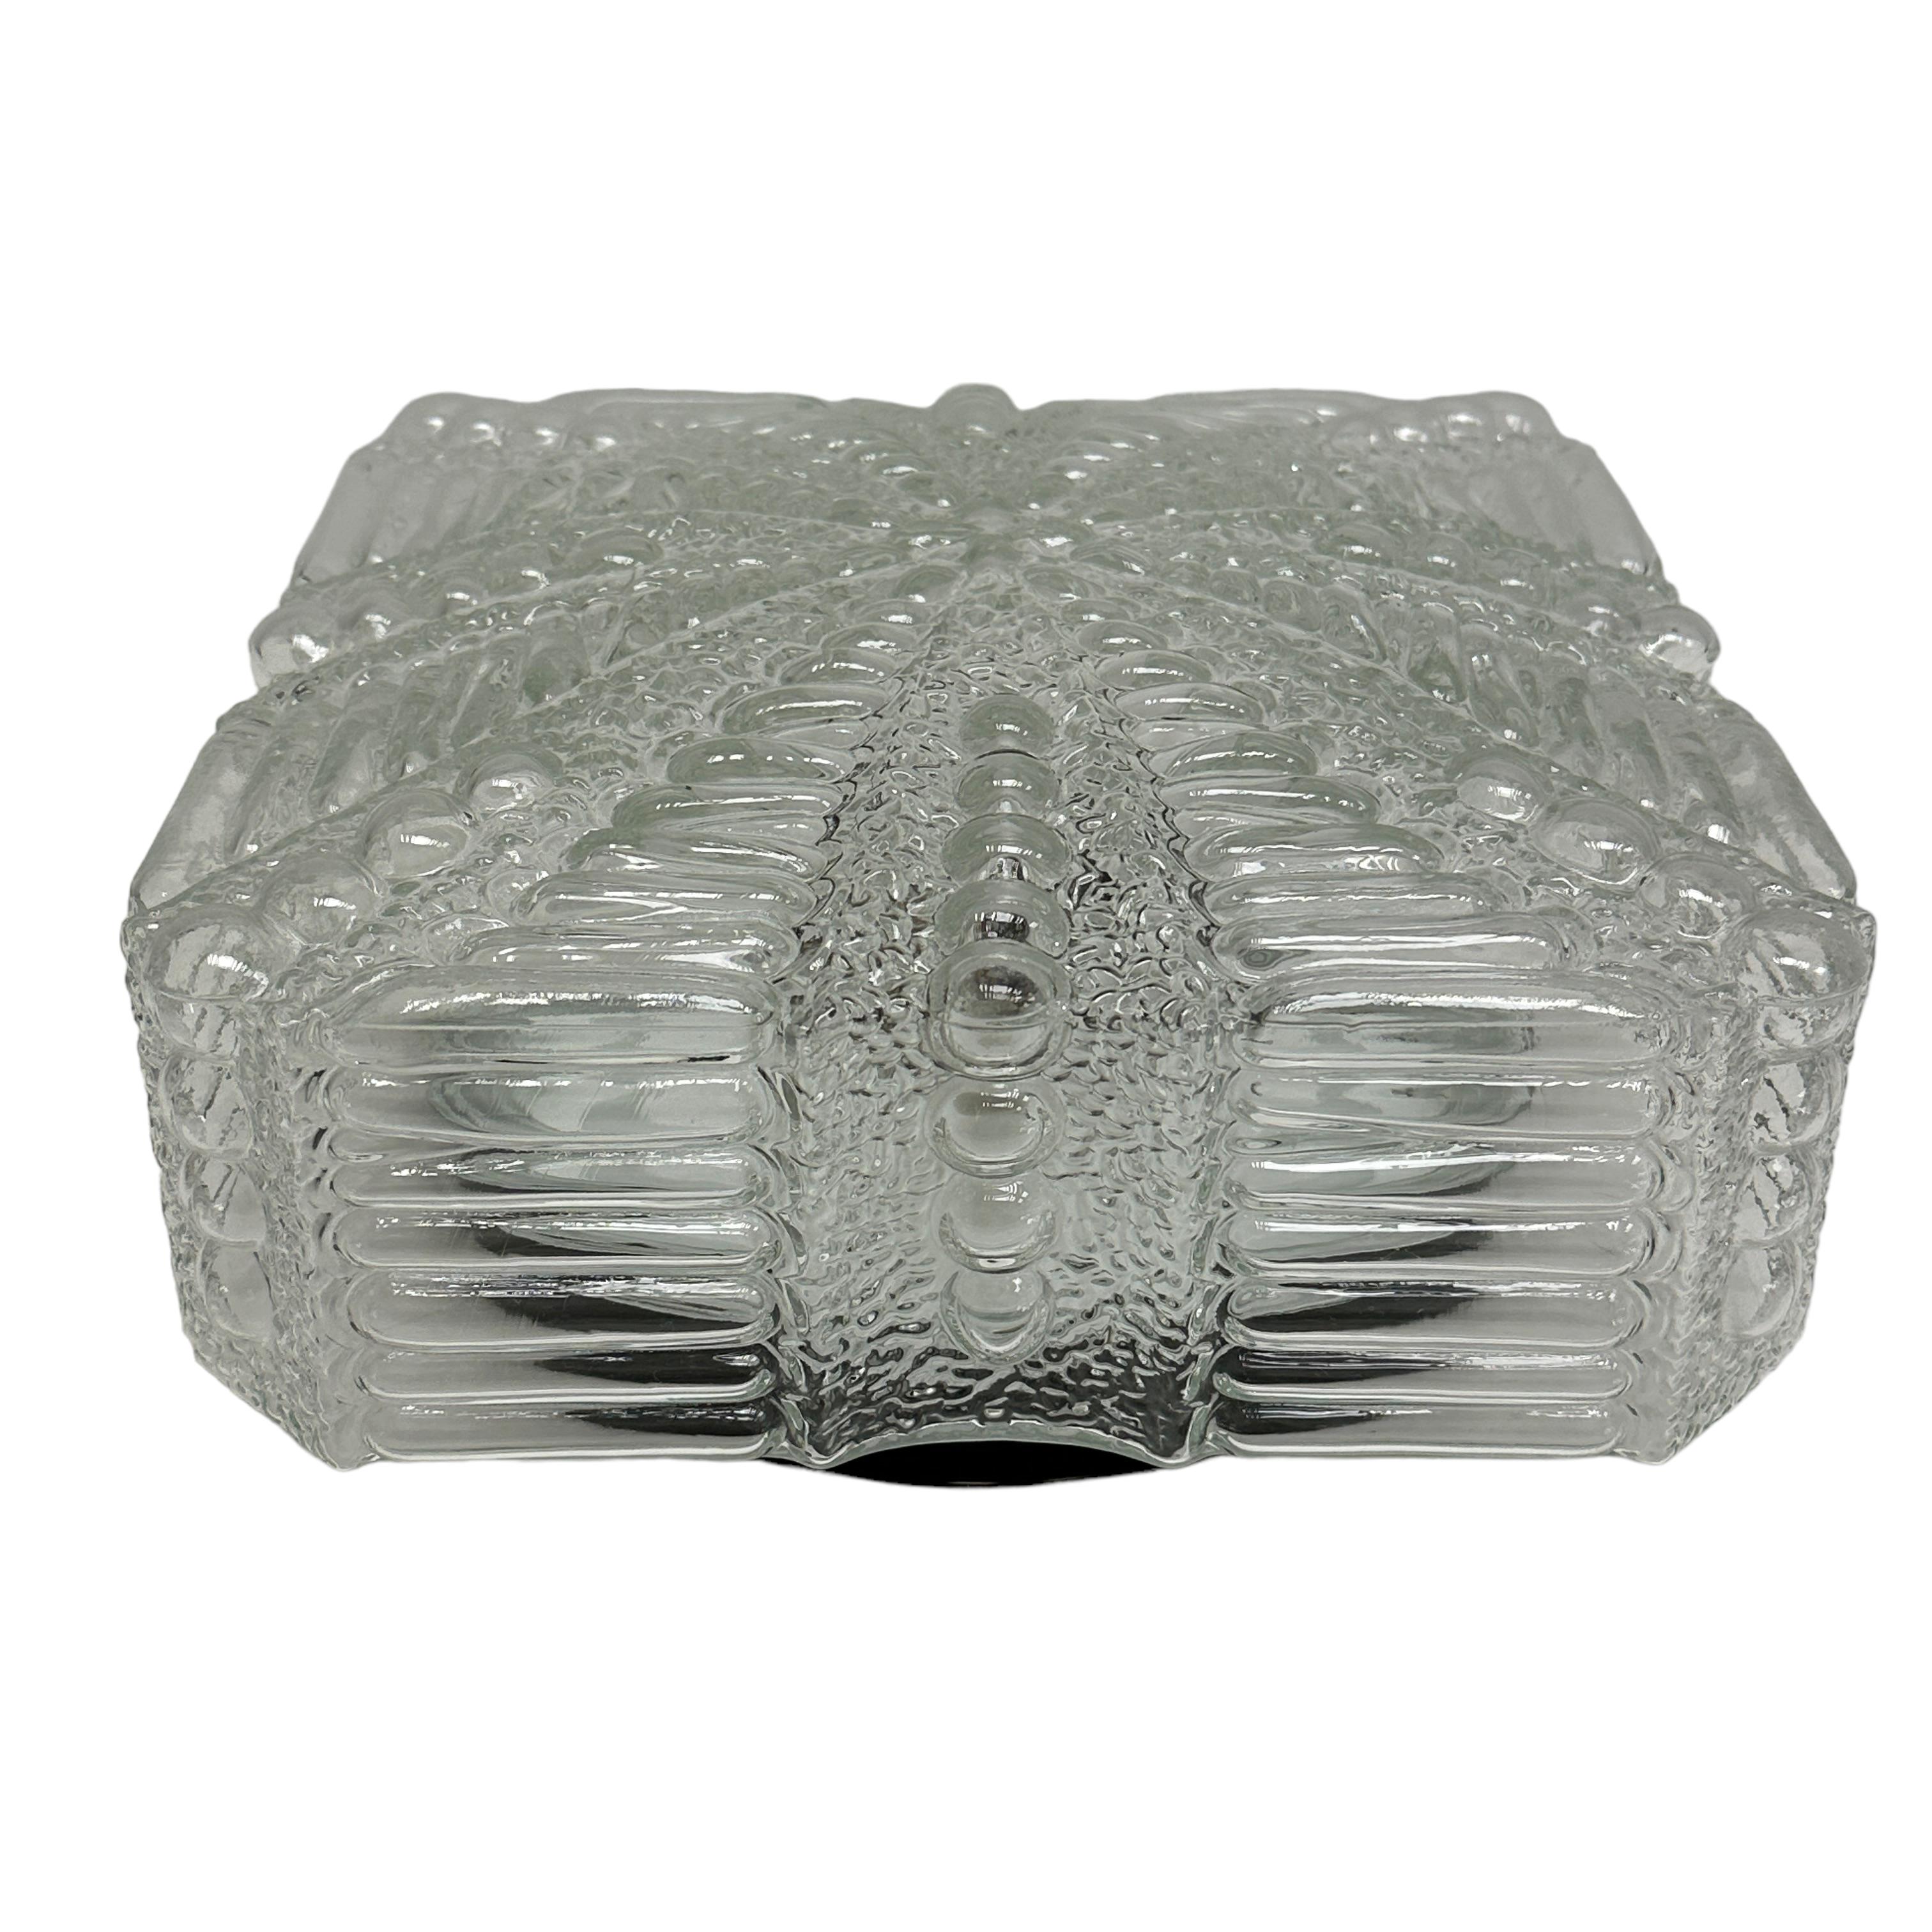 Beautiful Bubble and star pattern clear glass flush mount. Made in Germany by RZB Leuchten. Gorgeous textured glass flush mount with metal fixture. The Fixture requires one European E27/110 Volt Edison bulb, up to 60 watts. A nice addition to any